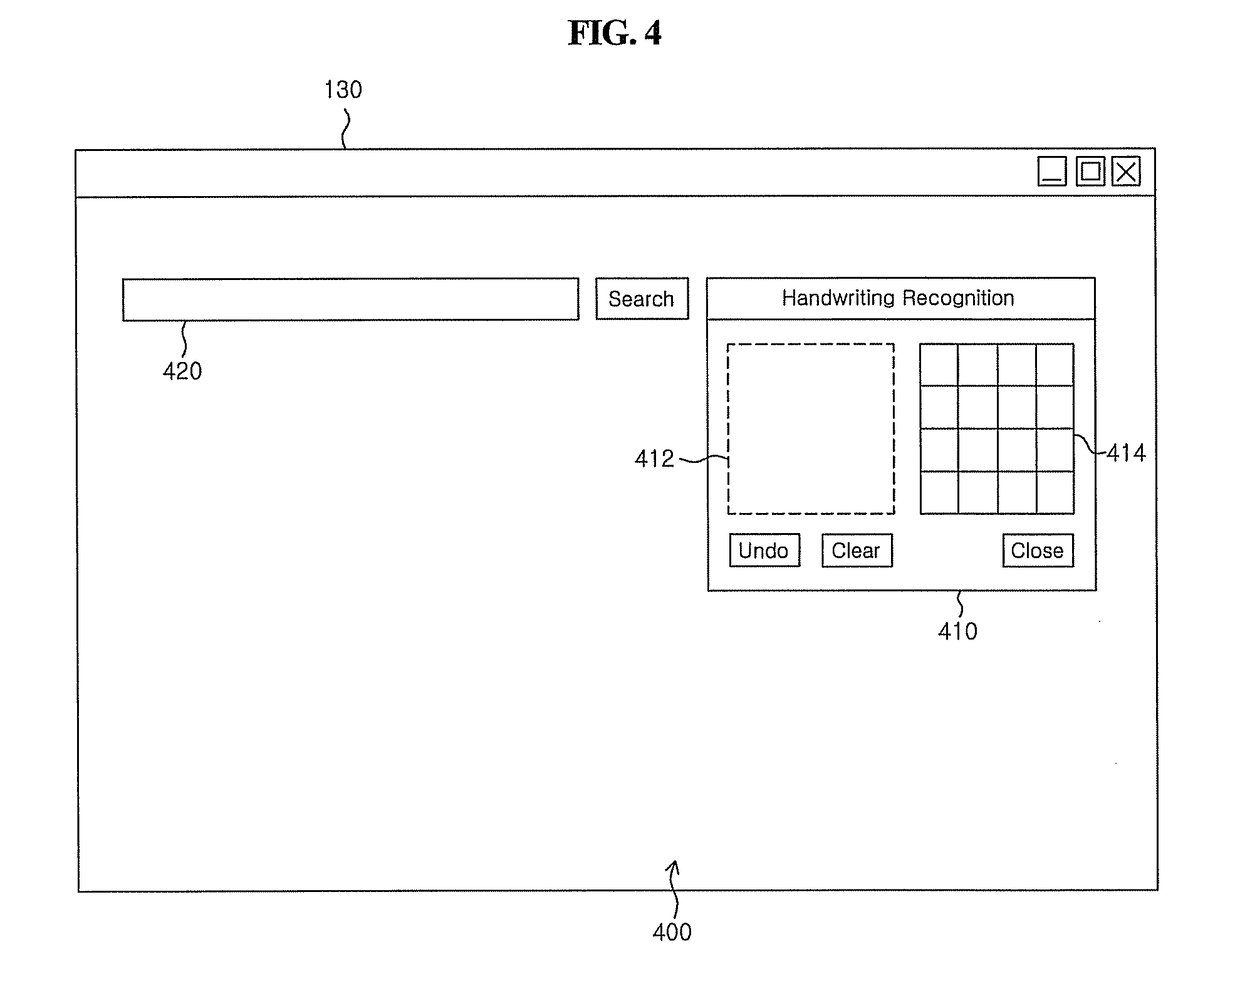 Method and system for controlling browser by using image